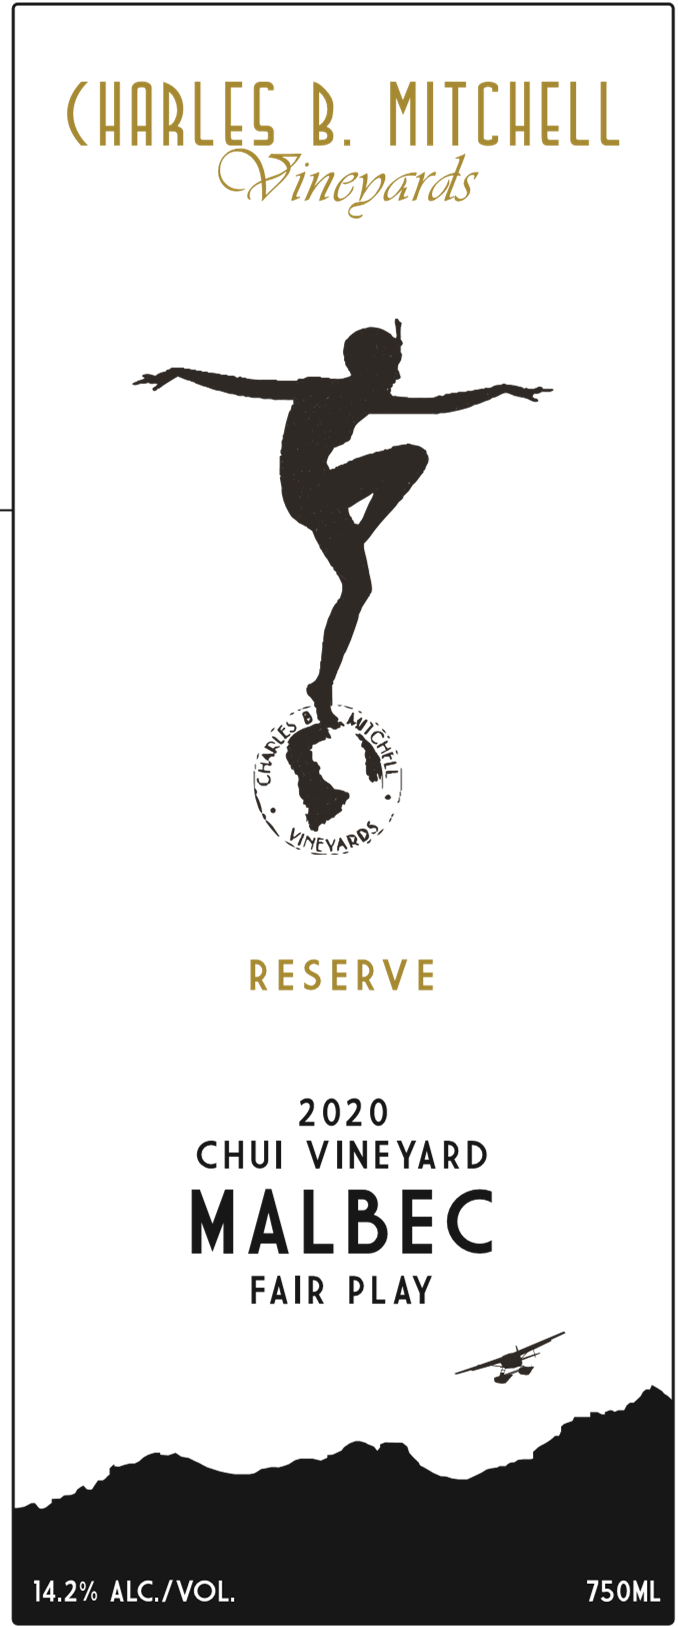 Product Image for 2020 Reserve Malbec